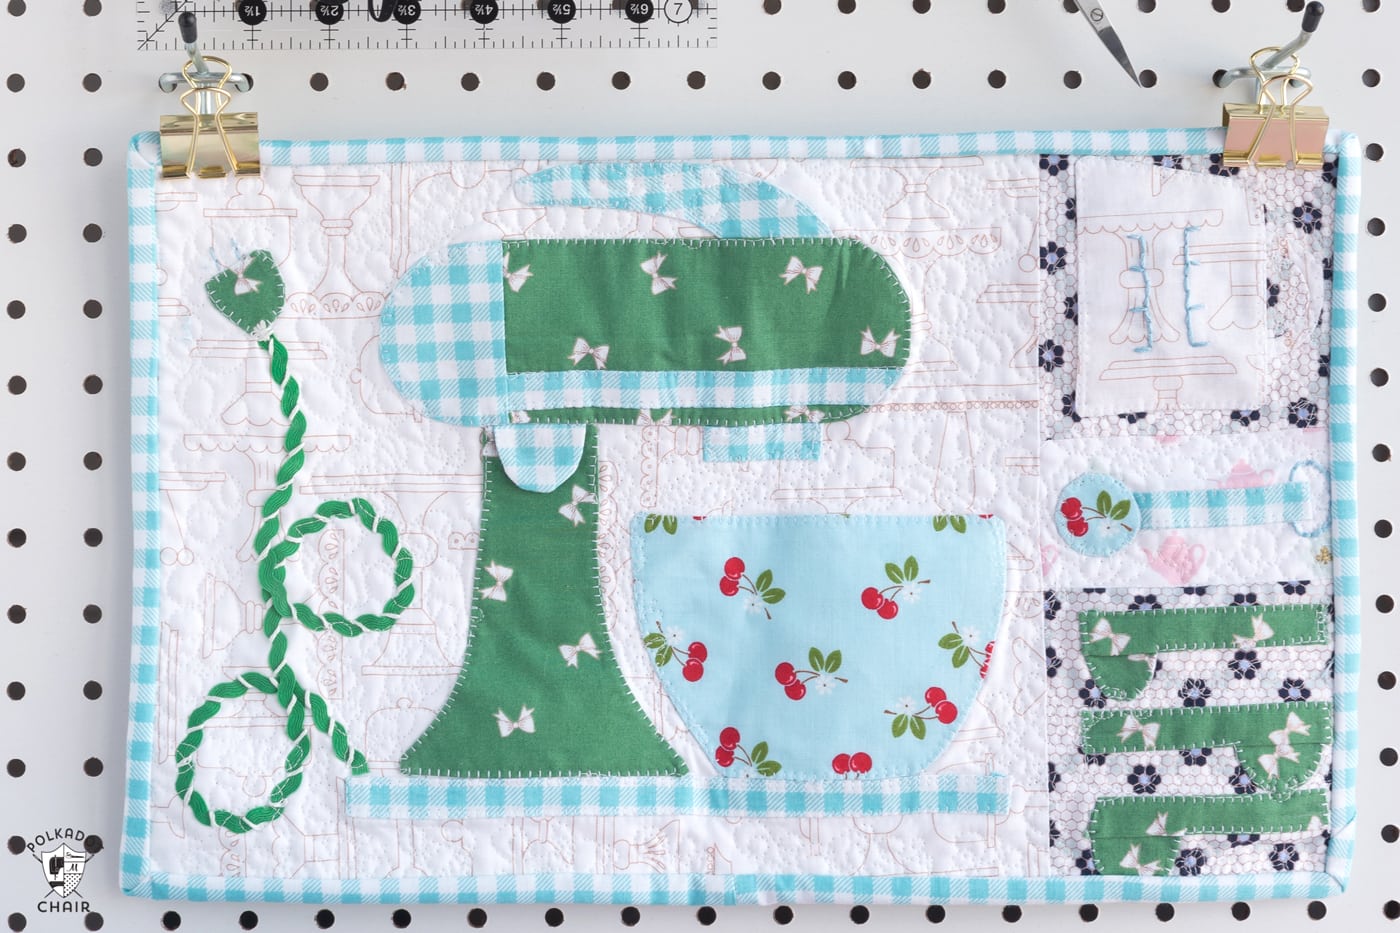 Lori Holt Bake Sale Quilt Along, Mixer block turned into a mini quilt. A cute vintage inspired mini quilt pattern